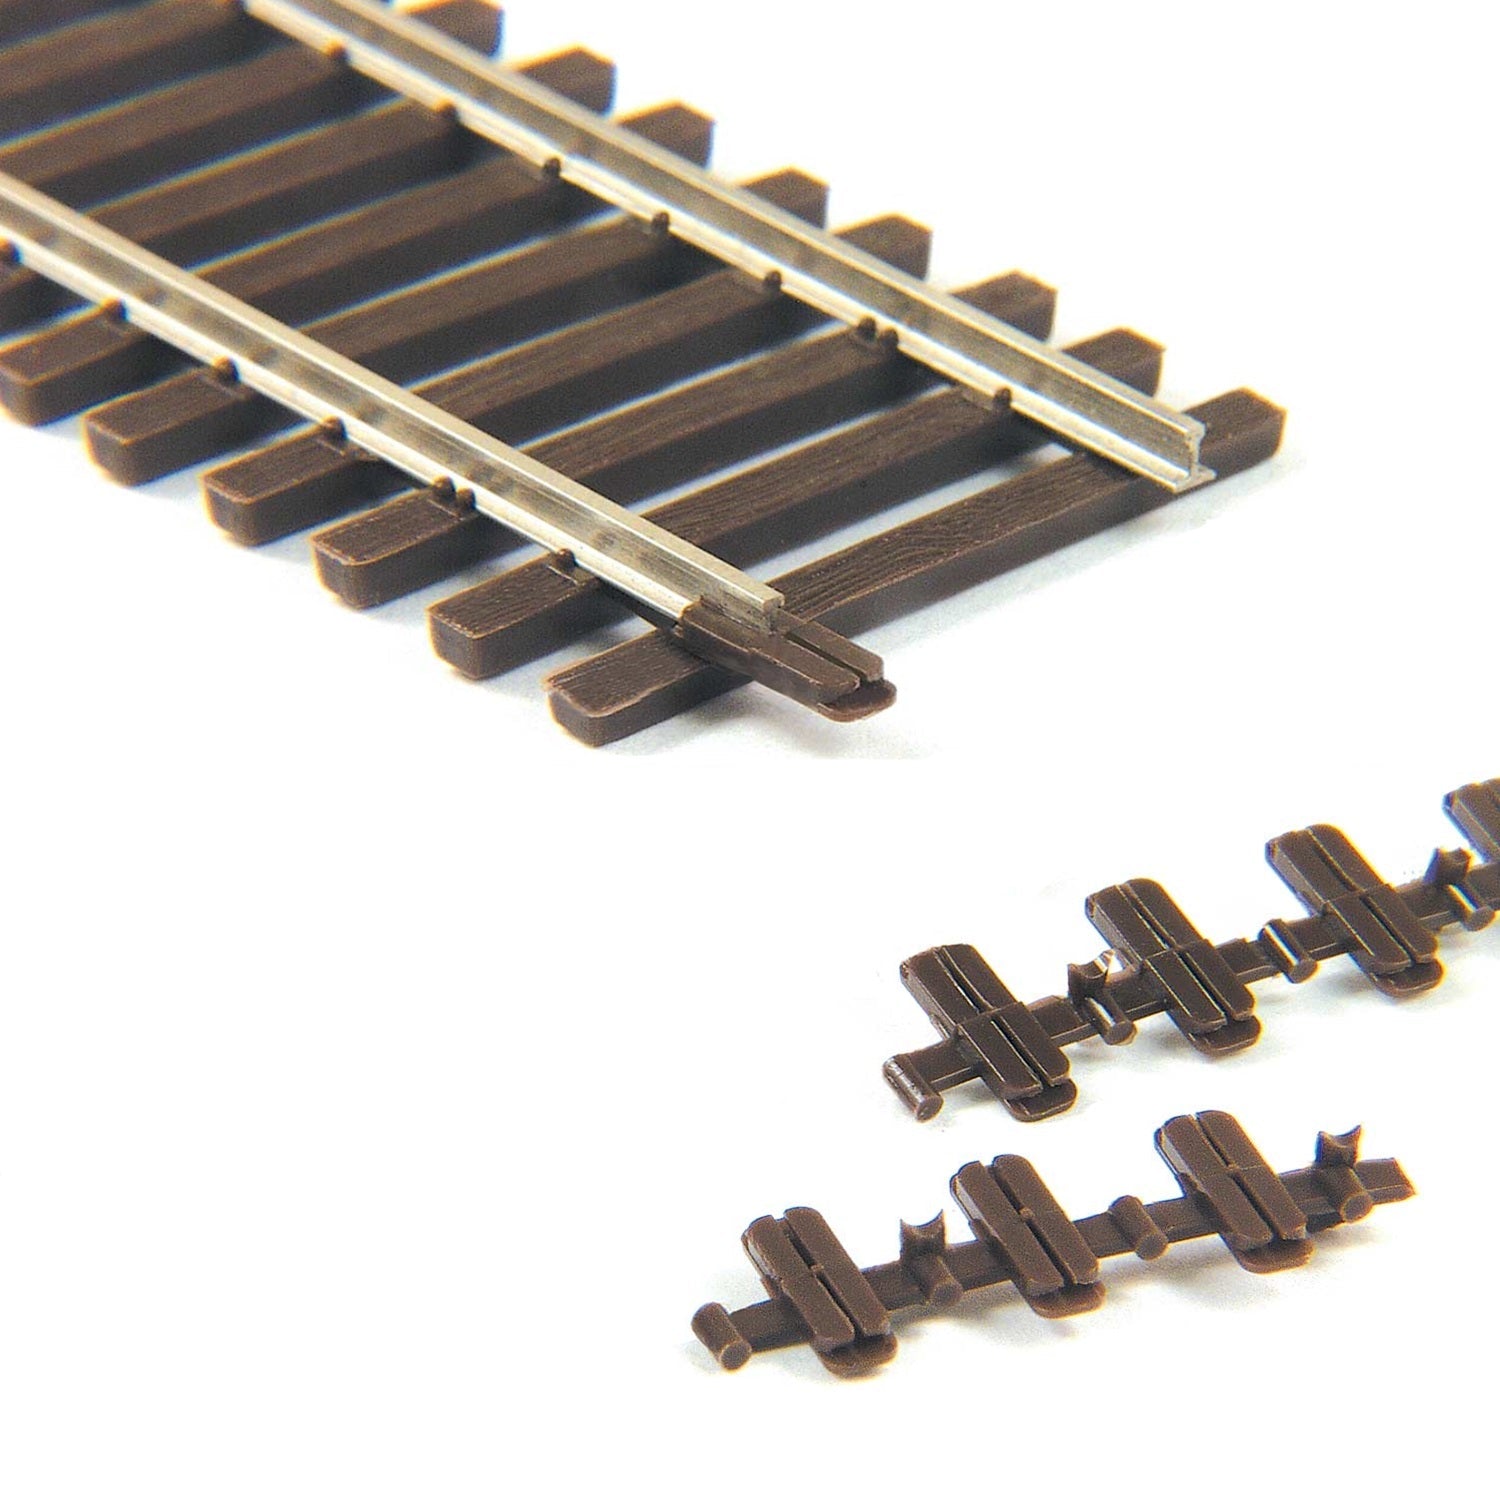 Micro Engineering Code 83 to 70 Transition Rail Joiners, 4 pair - Micro - Mark Model Train Accessories